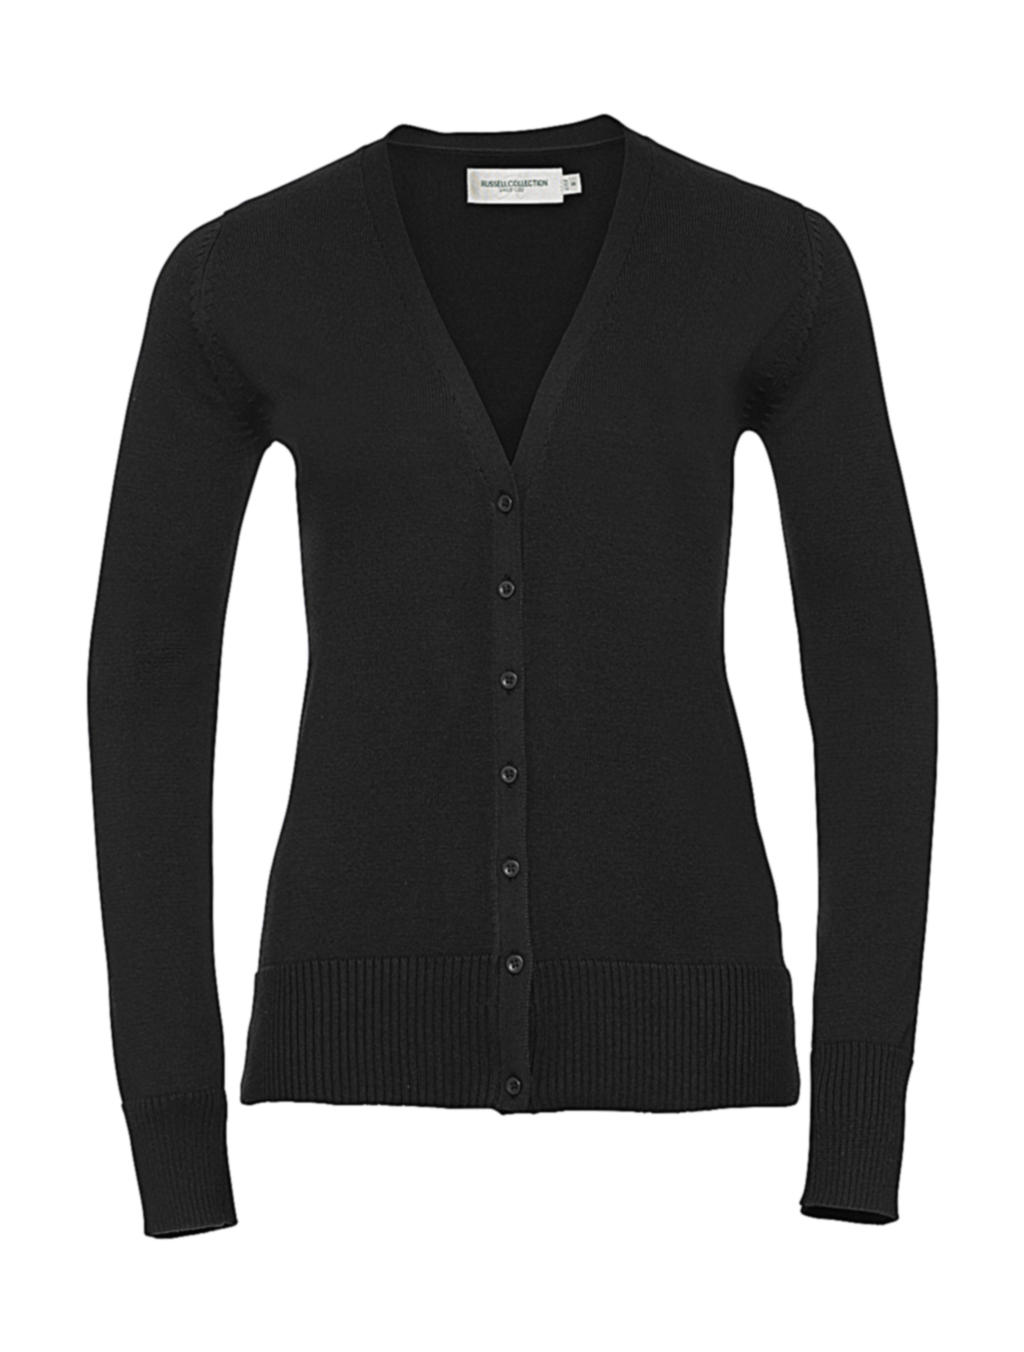  Ladies V-Neck Knitted Cardigan in Farbe Charcoal Marl